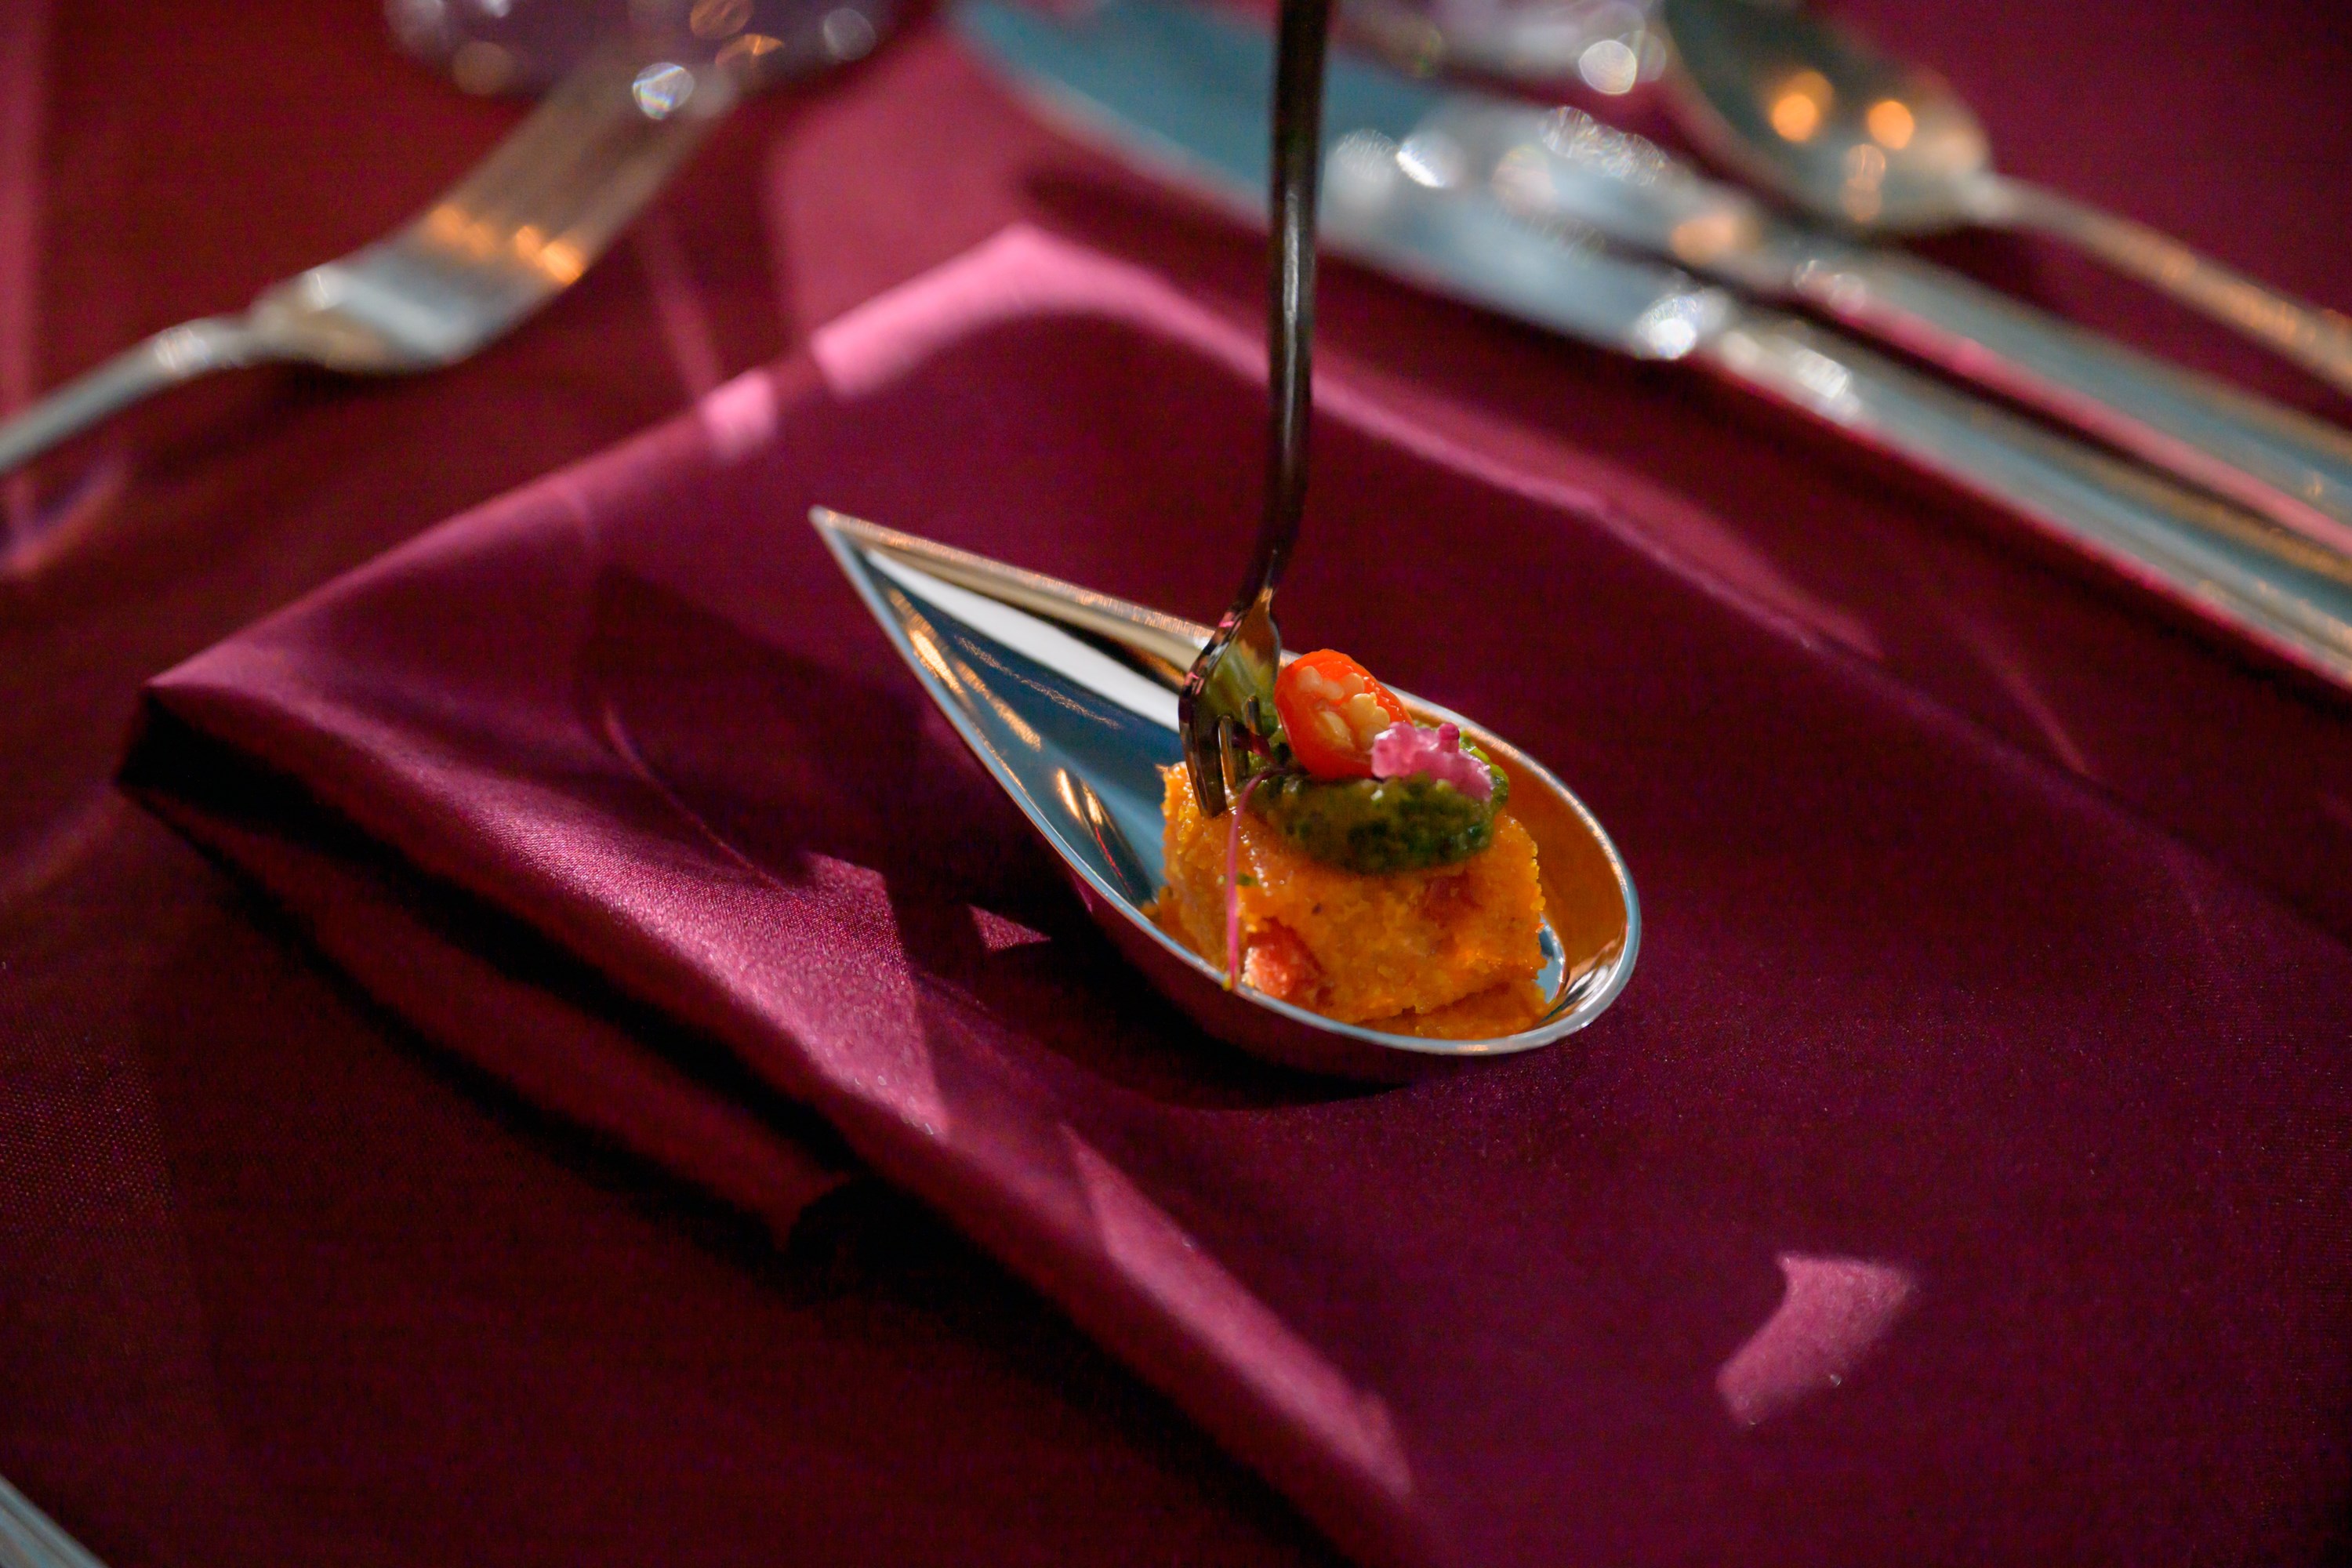 Hors d'oeuvres at the Valentine’s Day Dance at the Indiana Roof Ballroom in Indianapolis